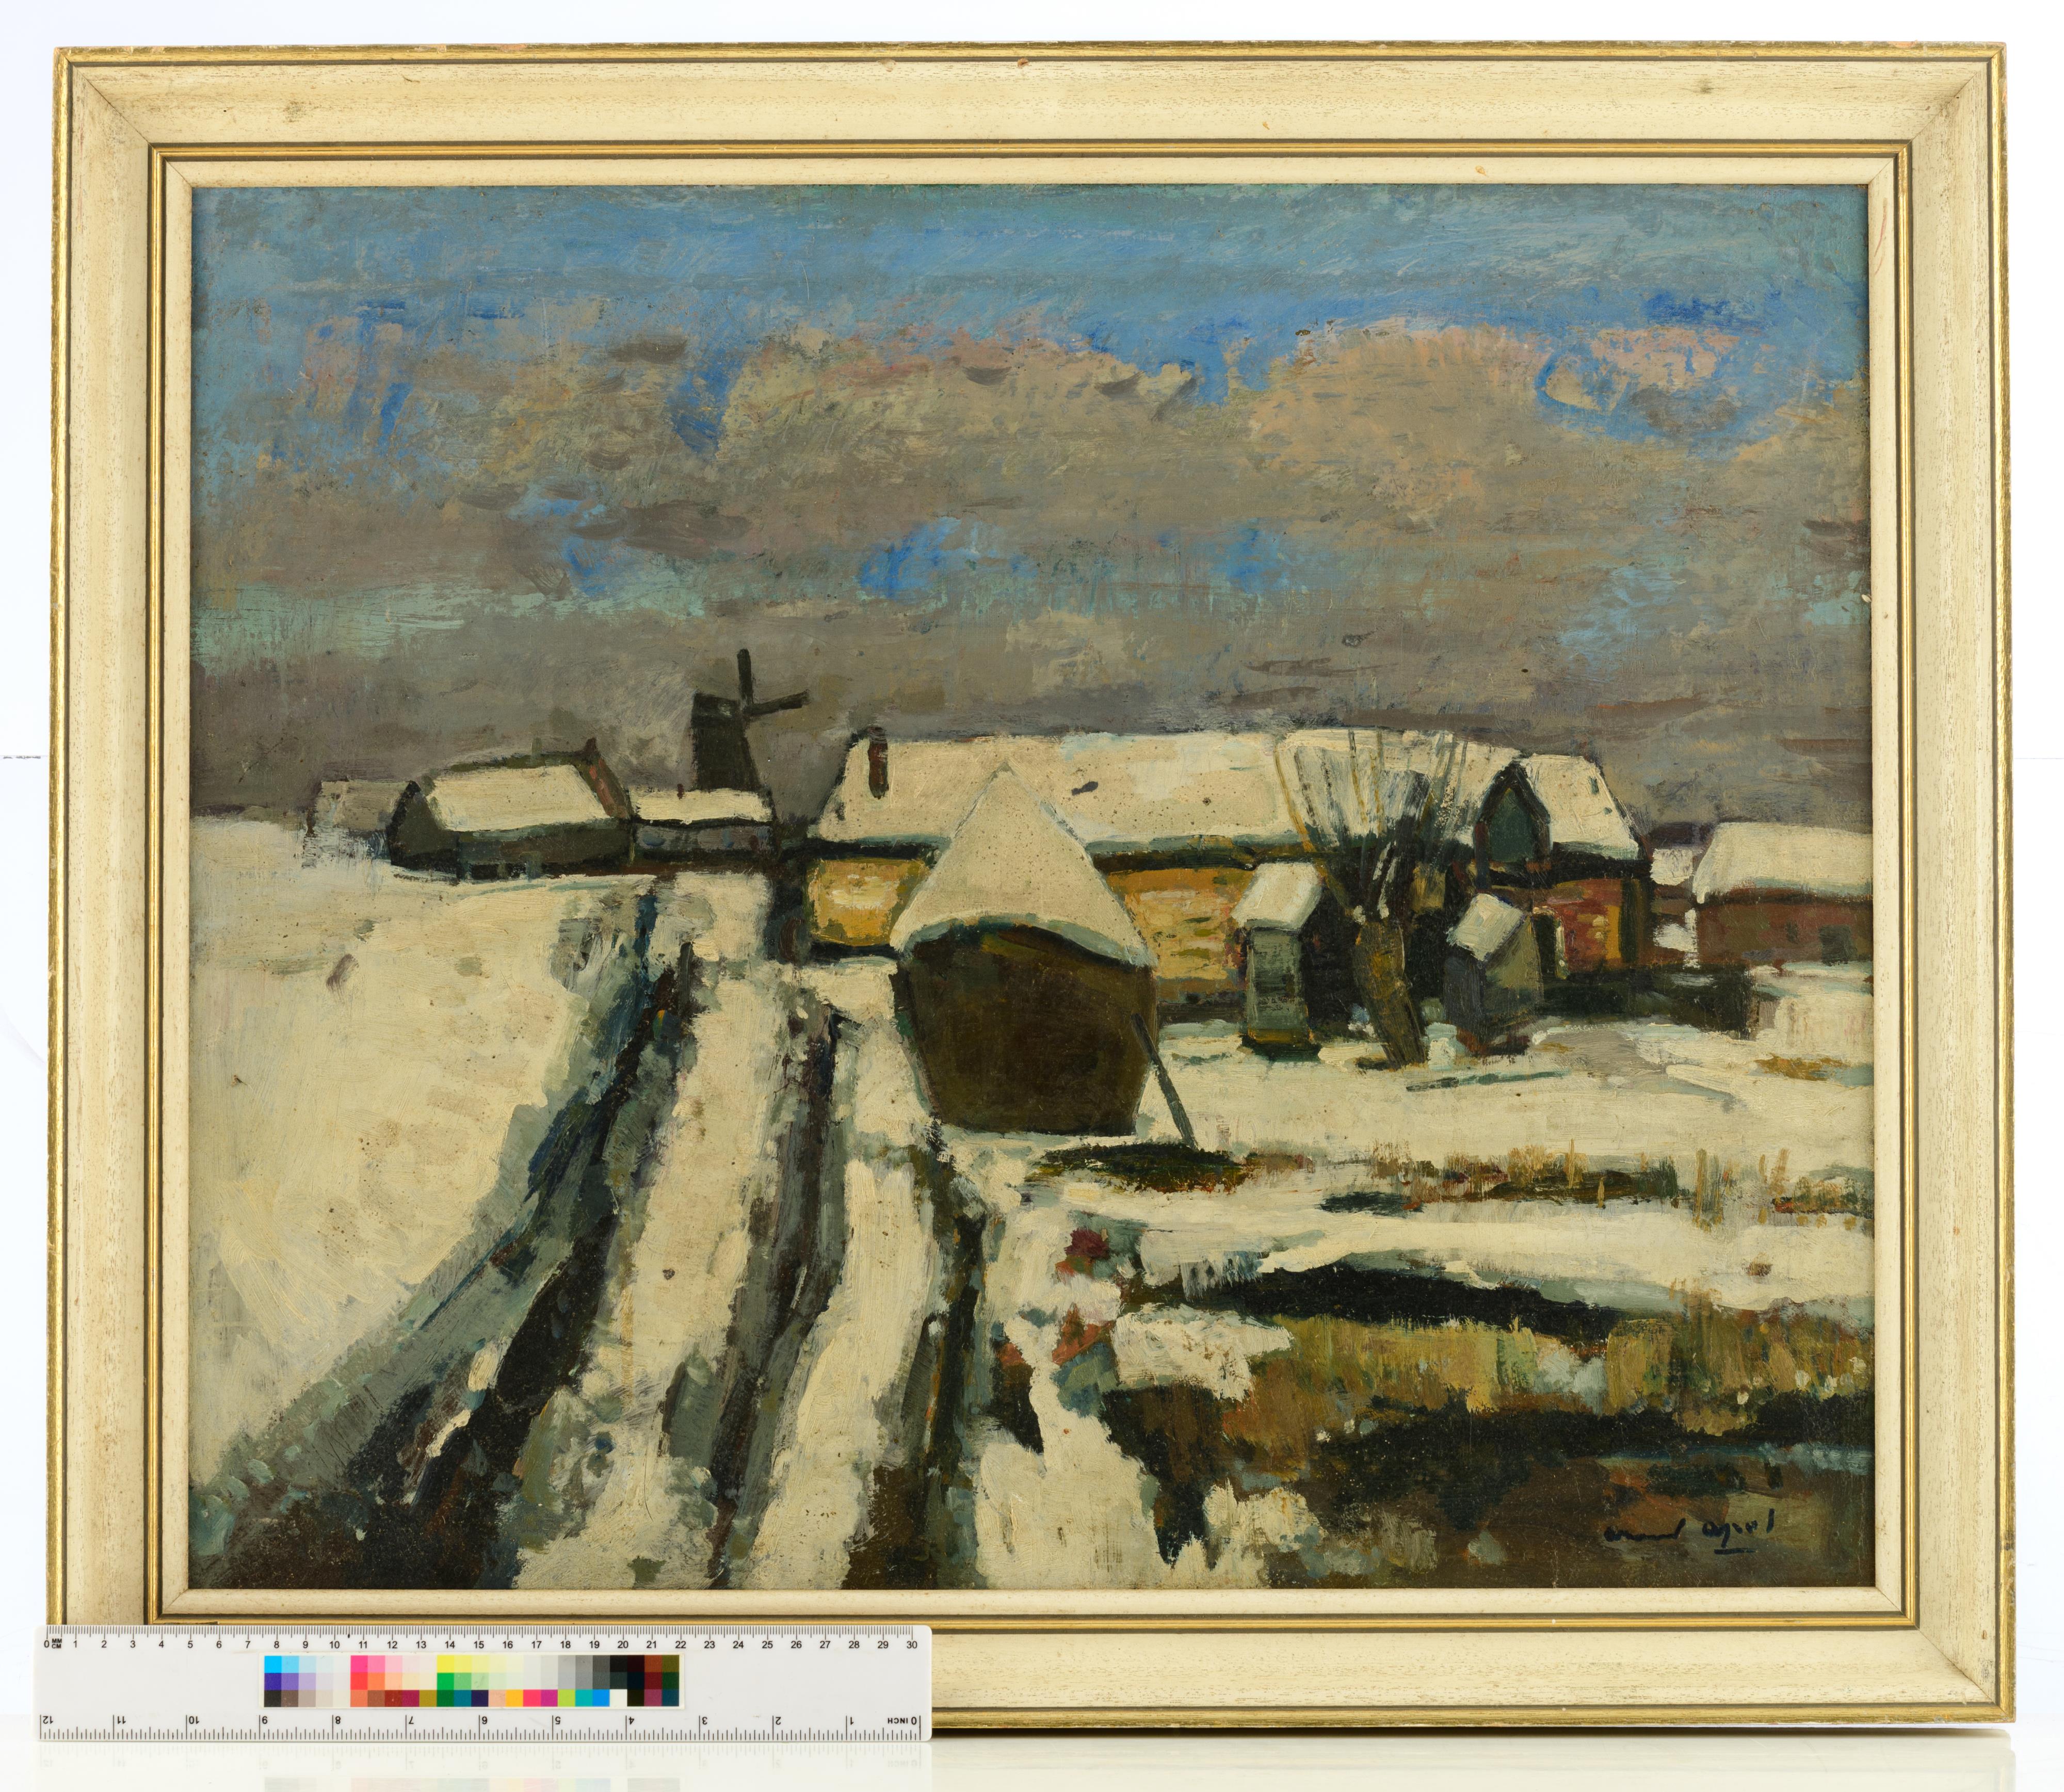 Apol A., a rural view in winter, oil on canvas, 50 x 60 cm. Added: Frank L., a cloudy view on Bruges - Image 7 of 7